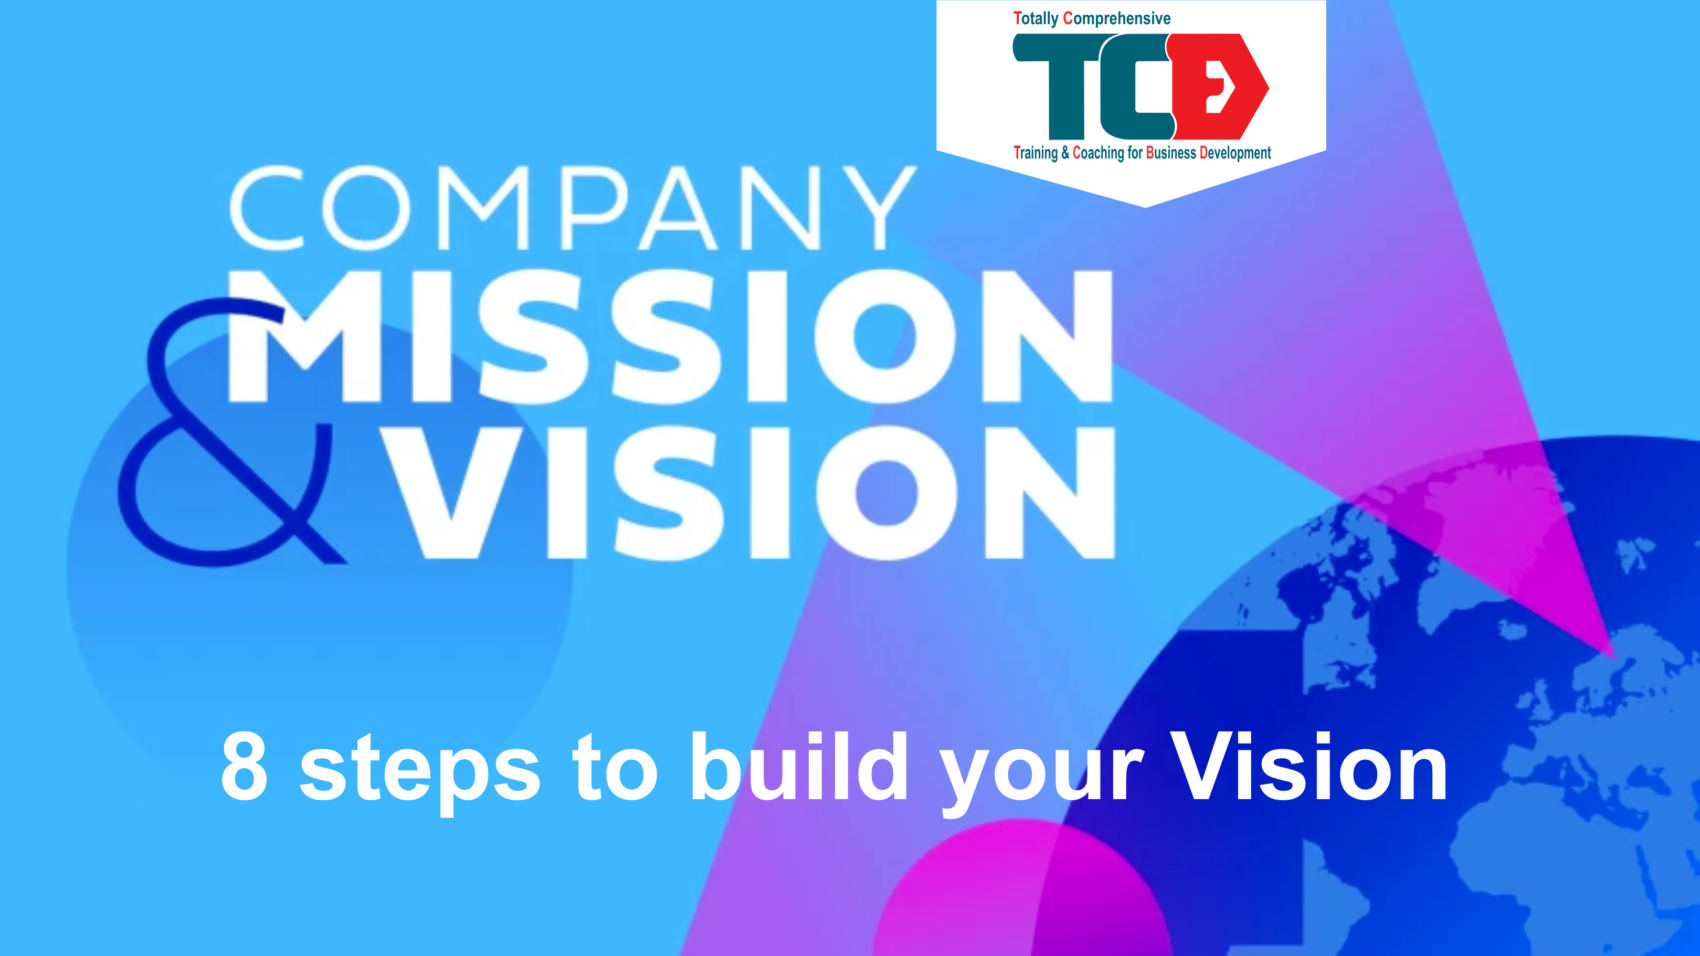 8 steps to build your vision, what is the vision